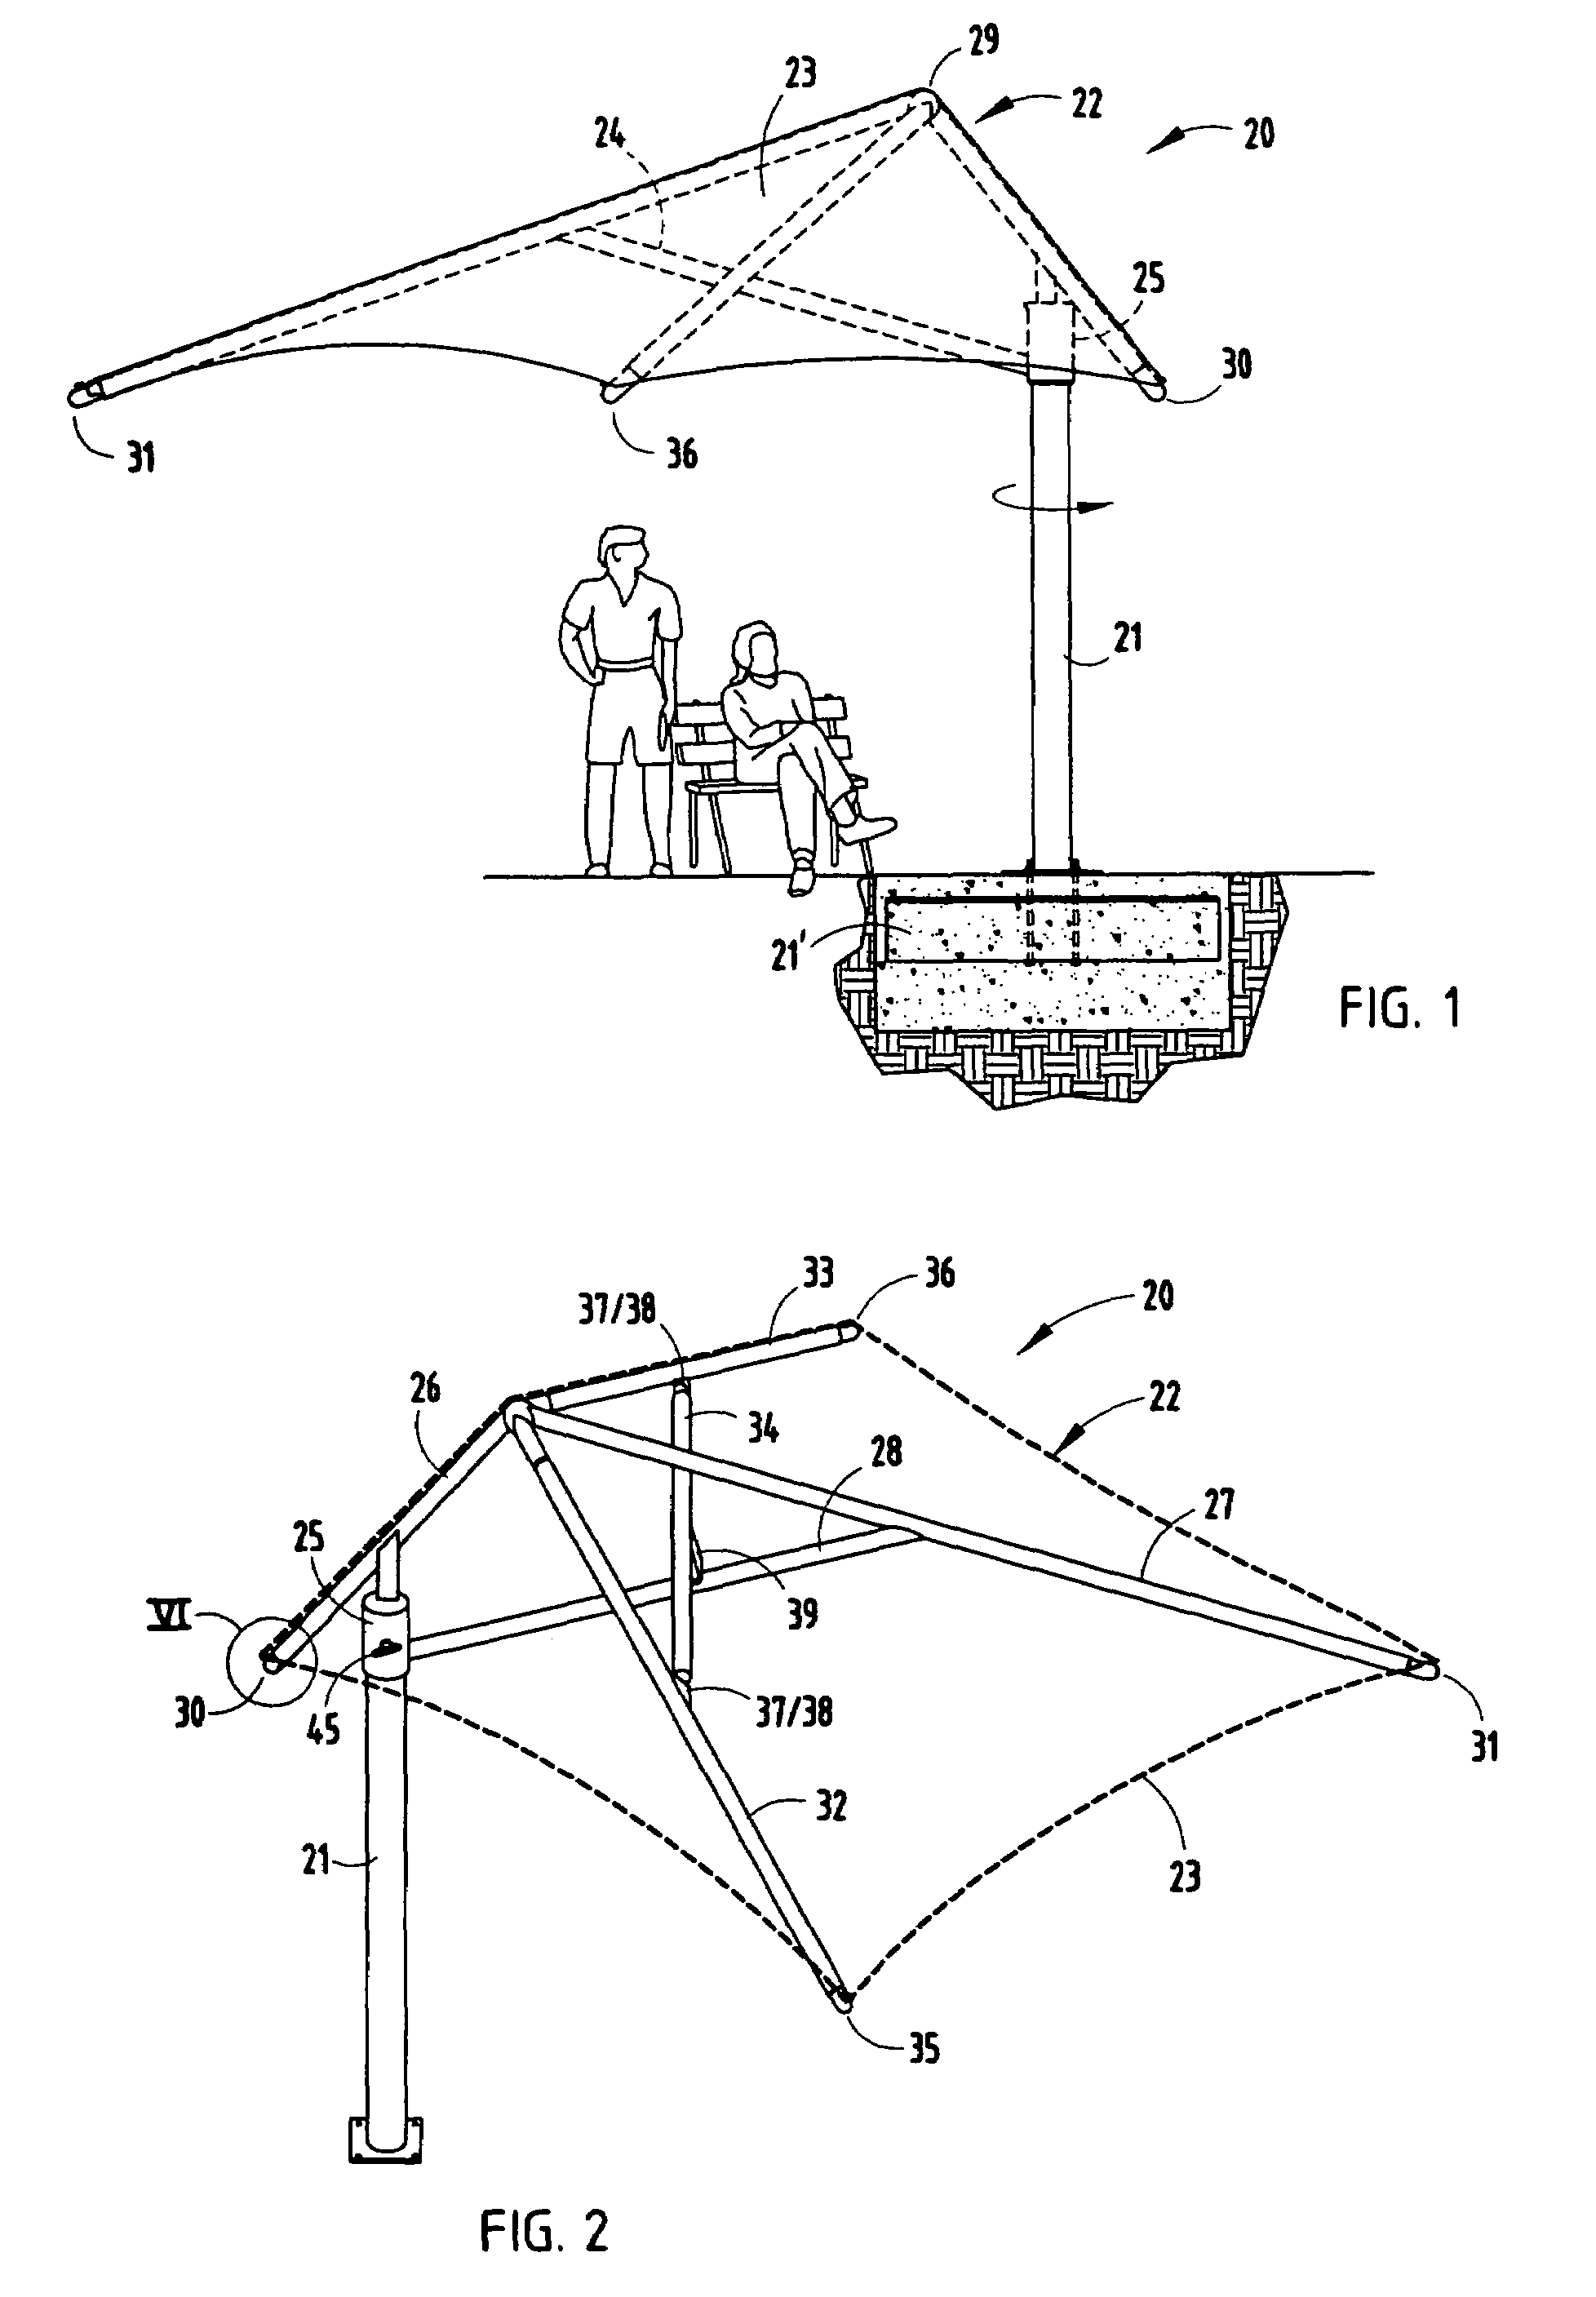 Adjustable shade-providing building structure